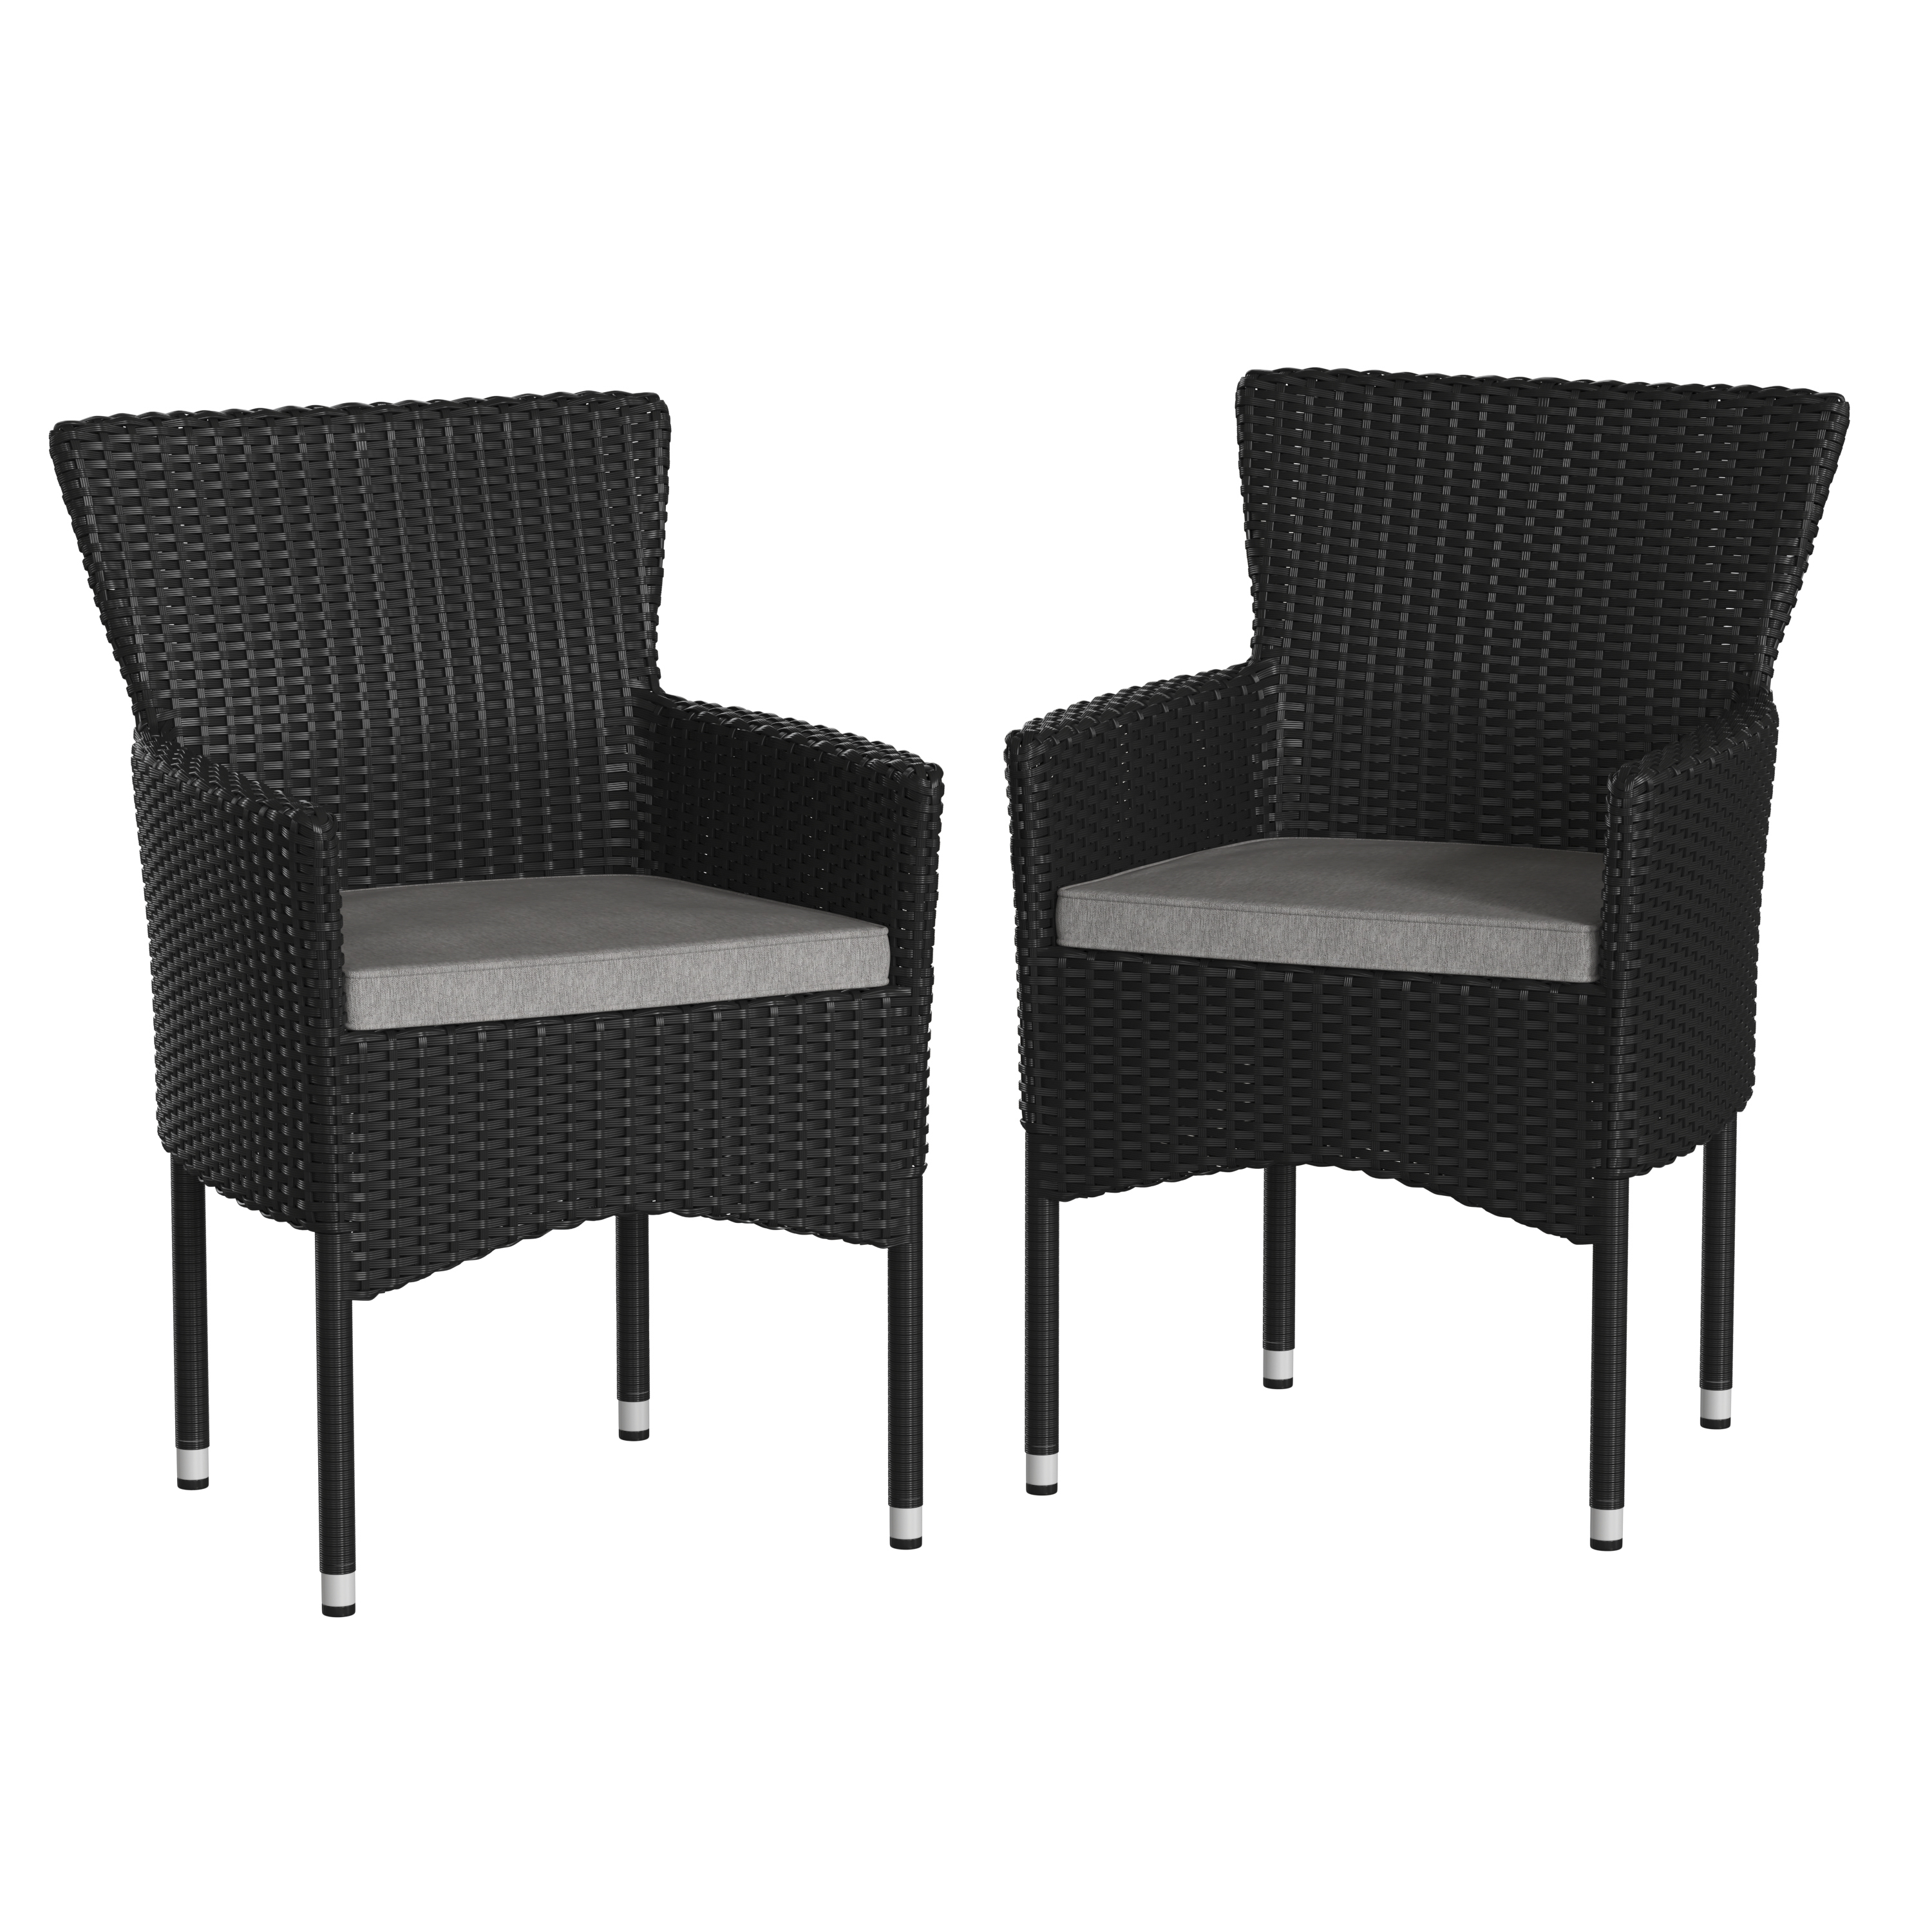 Flash Furniture 2-TW-3WBE074-BK-GG All-Weather Modern Black Wicker Patio Armchair with Gray Cushions, Set of 2